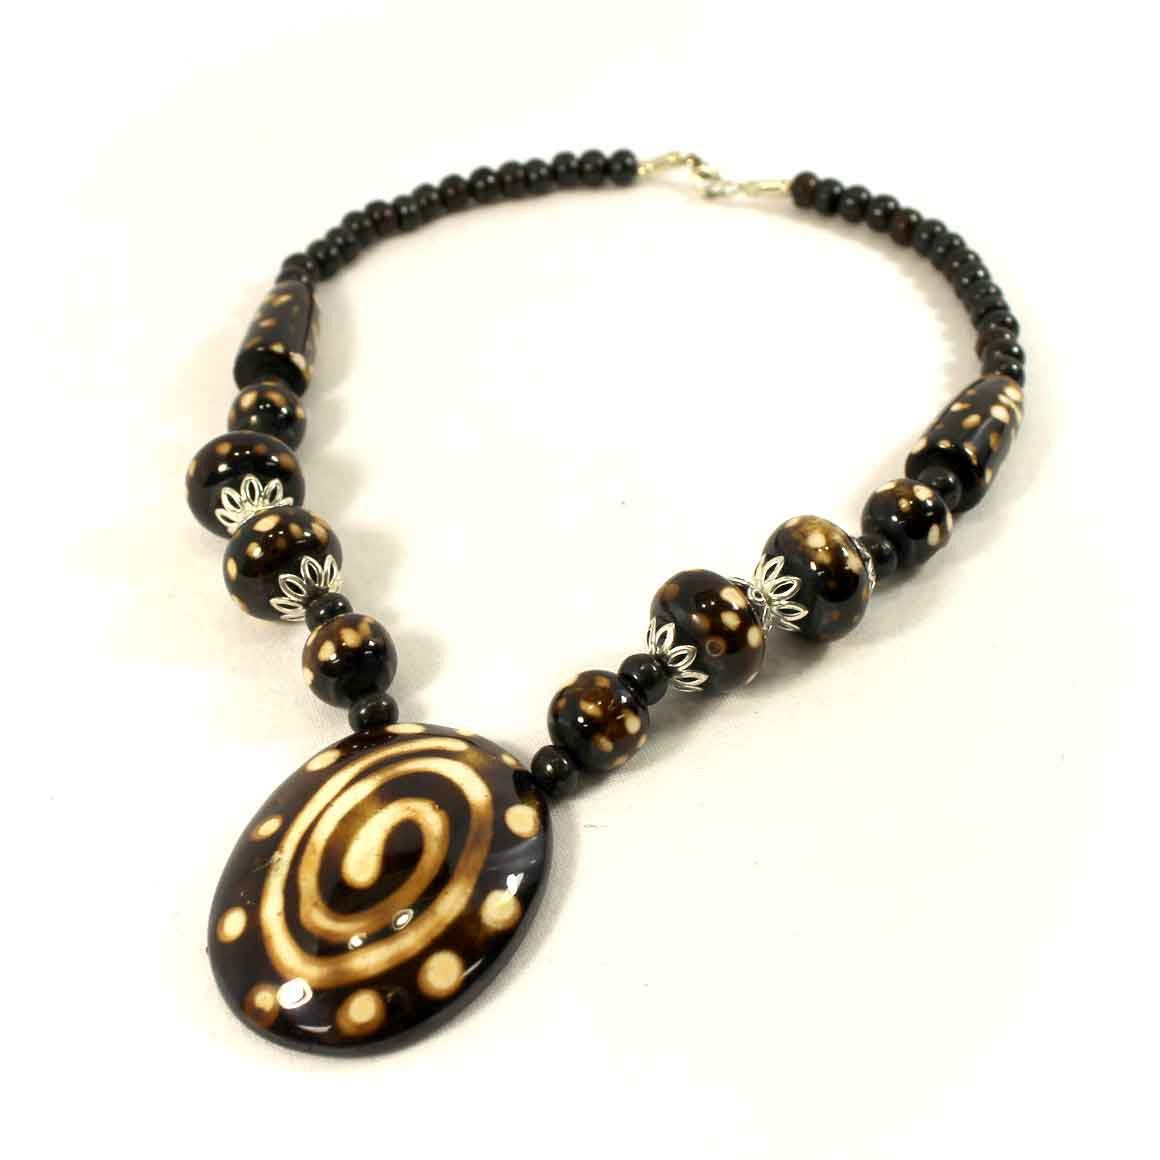 Boho Chic Men Necklace with Adjustable Cord - Stylish and Versatile